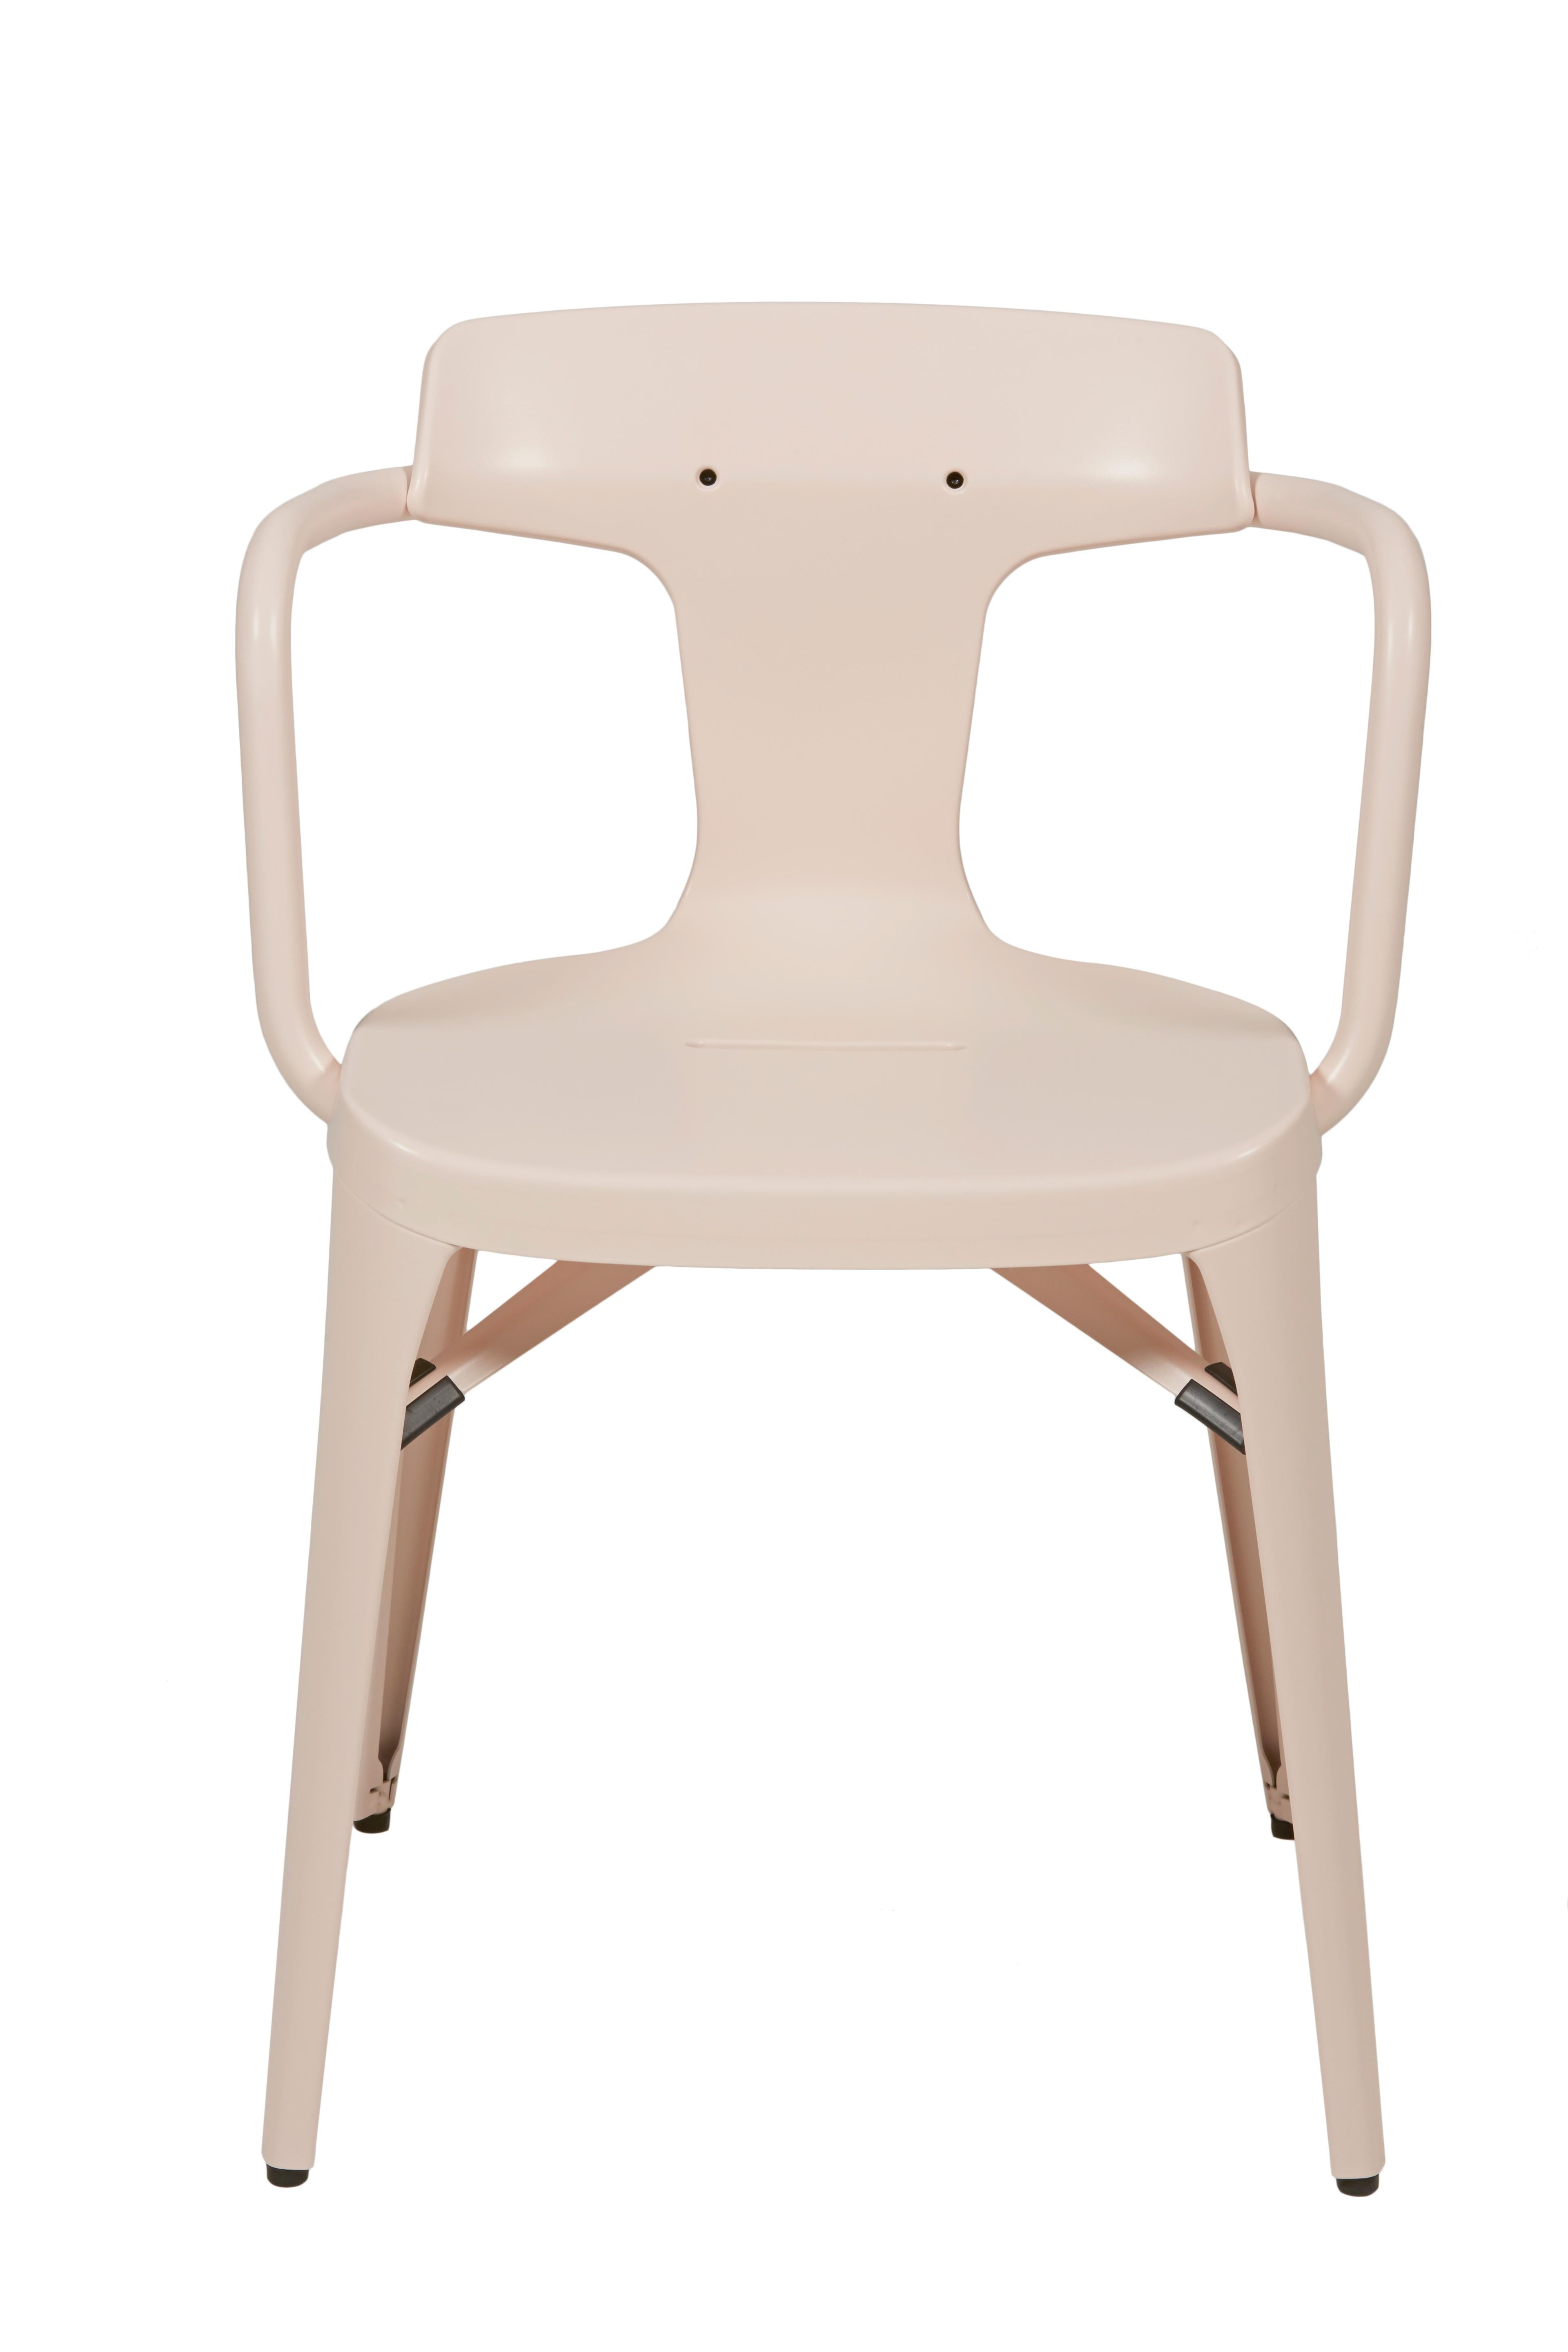 Im Angebot: T14 Chair in Pop Colors by Patrick Norguet and Tolix, Pink (Rose Poudré)